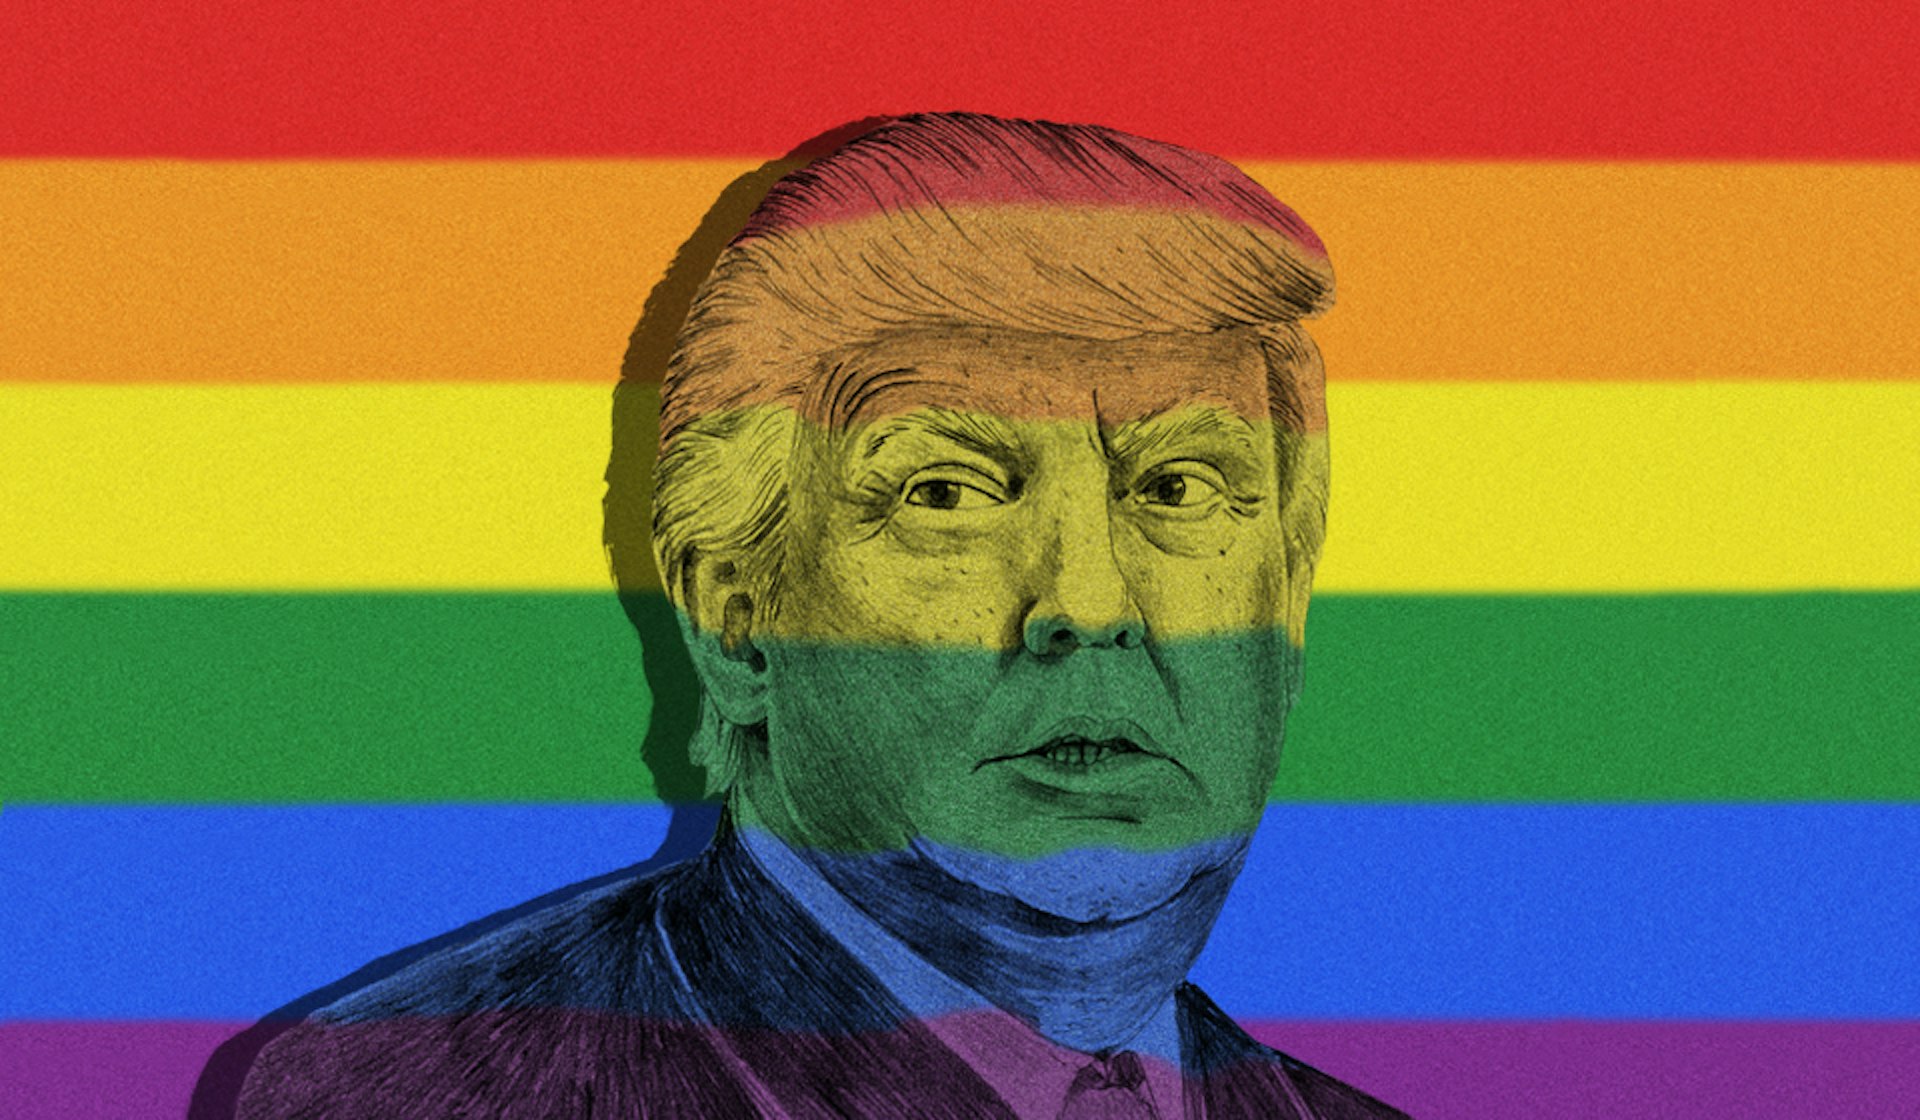 In Trump's America, there is nowhere for LGBT people to hide